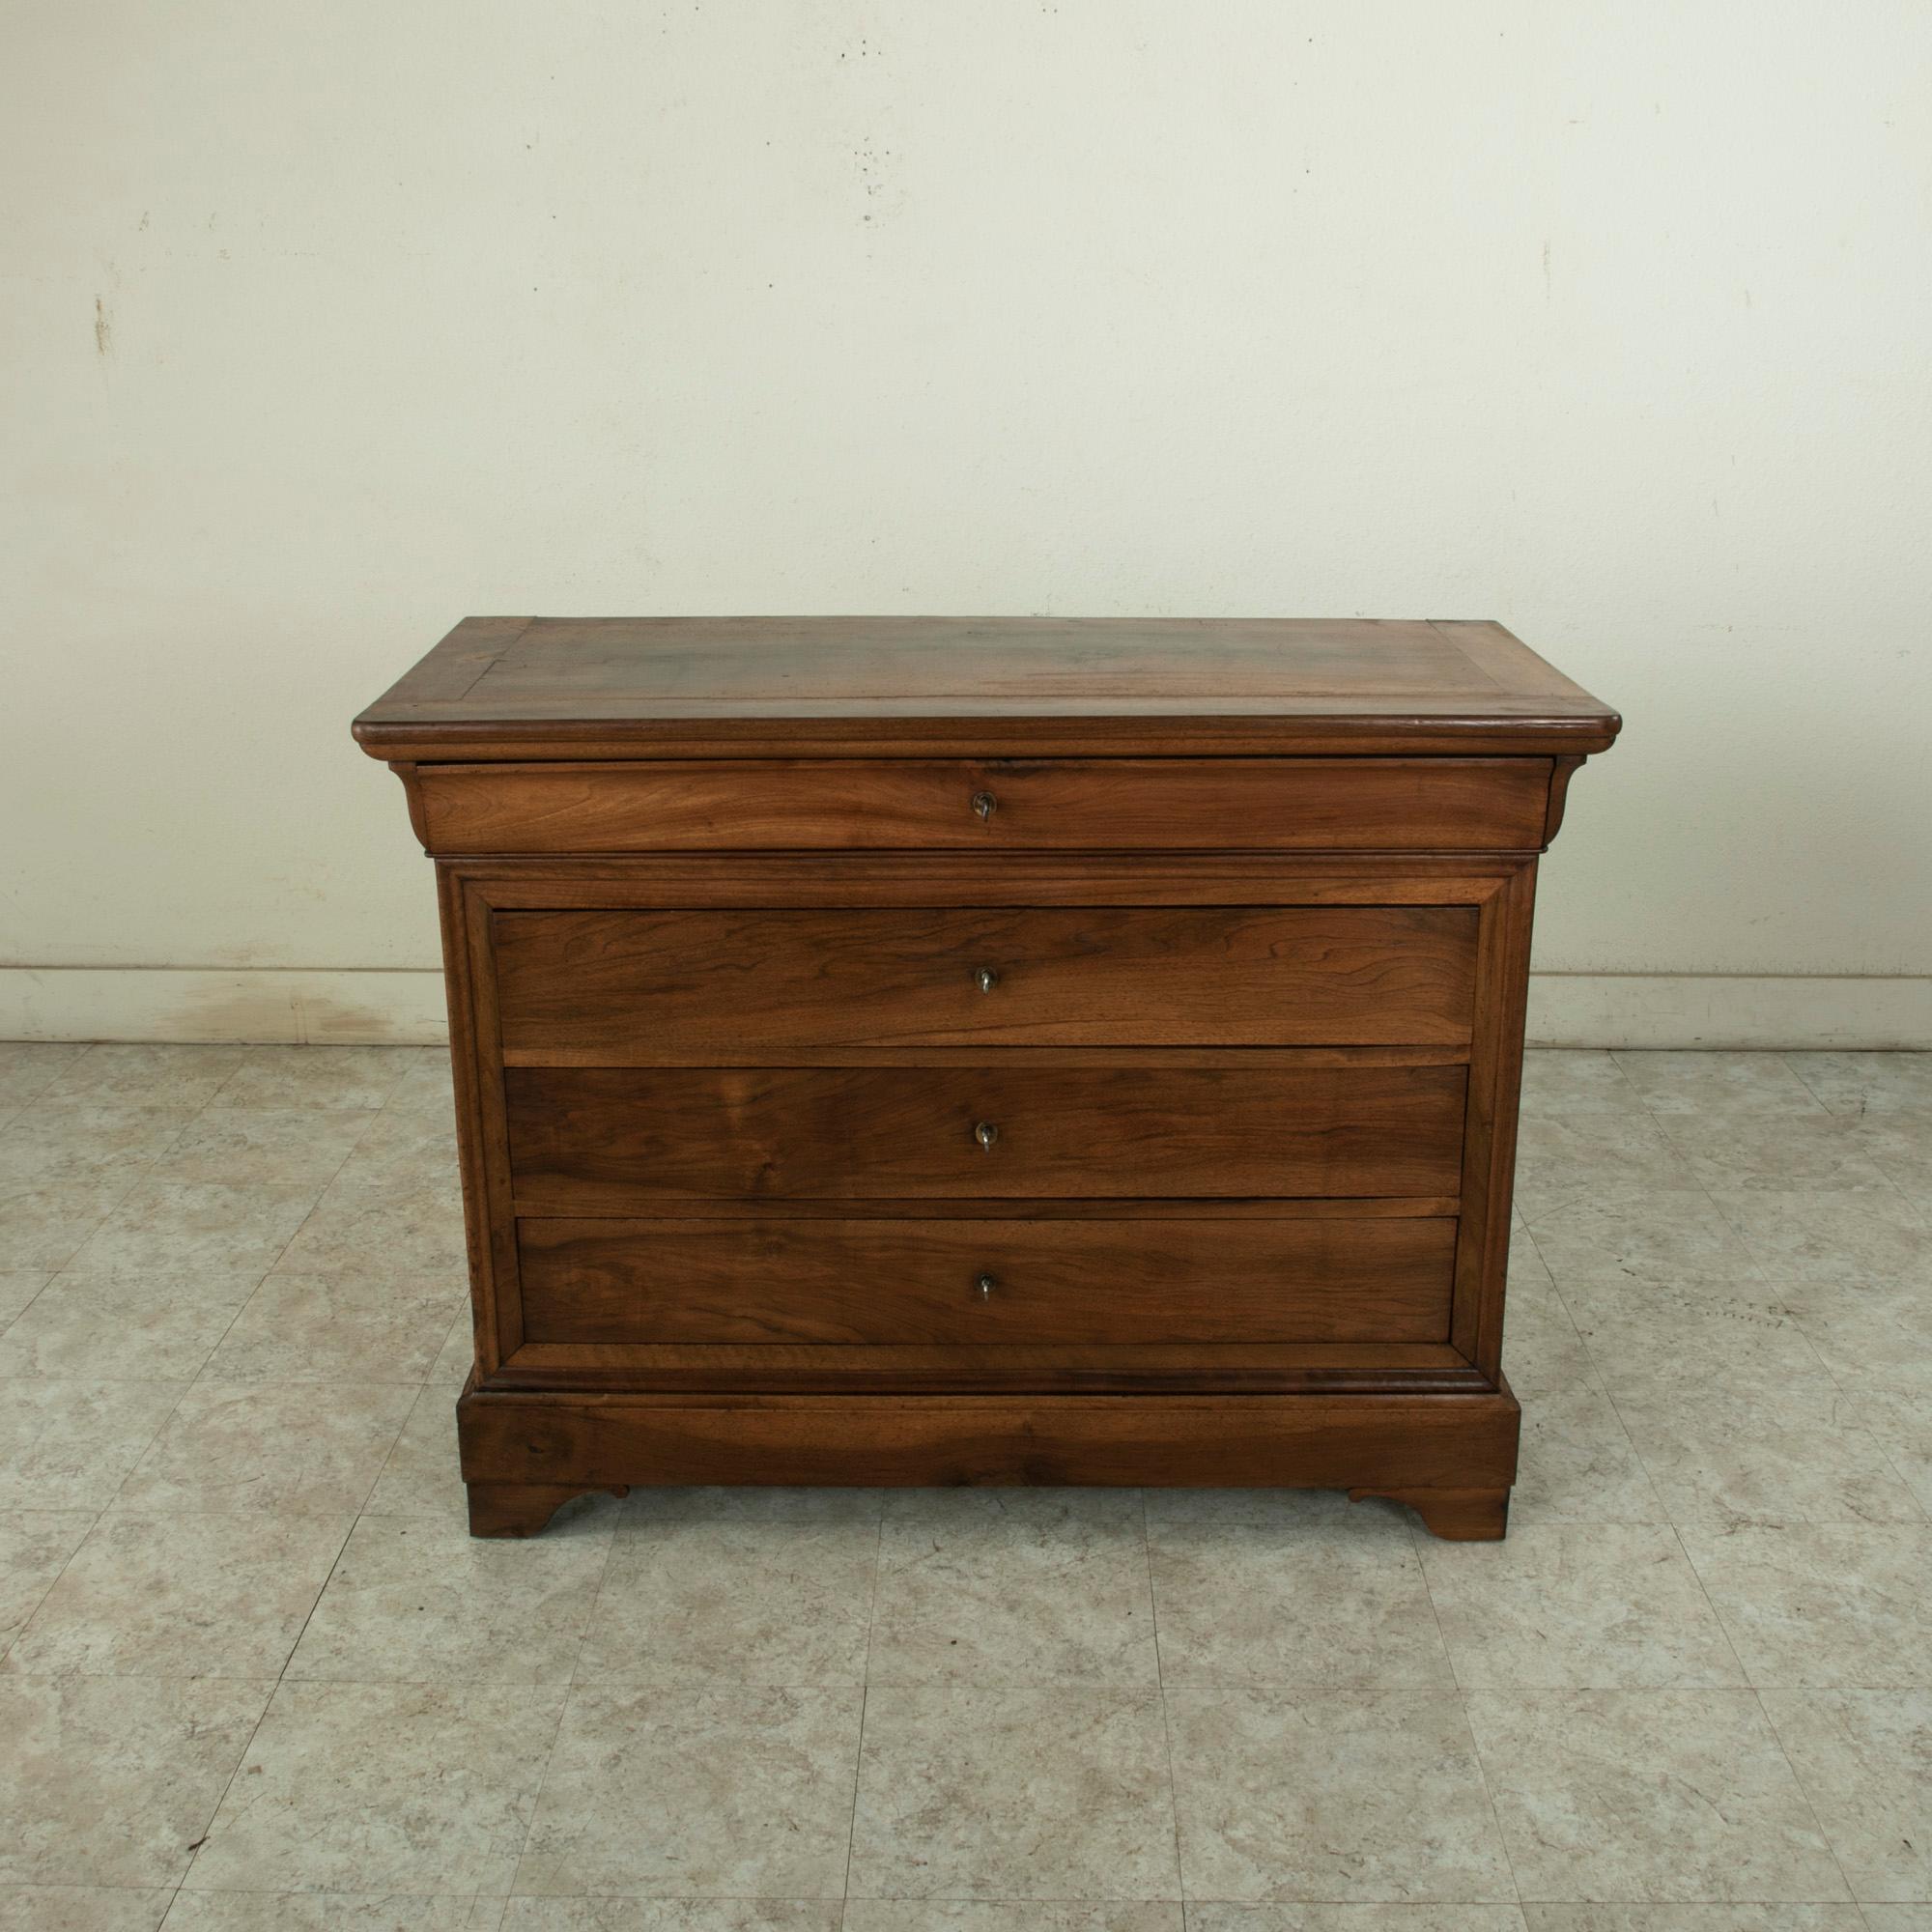 This nineteenth century French Louis Philippe period commode or chest of drawers is constructed of solid walnut. Its four drawers of dovetail construction each open using its key as a drawer pull. A handsome piece with clean simple lines, circa